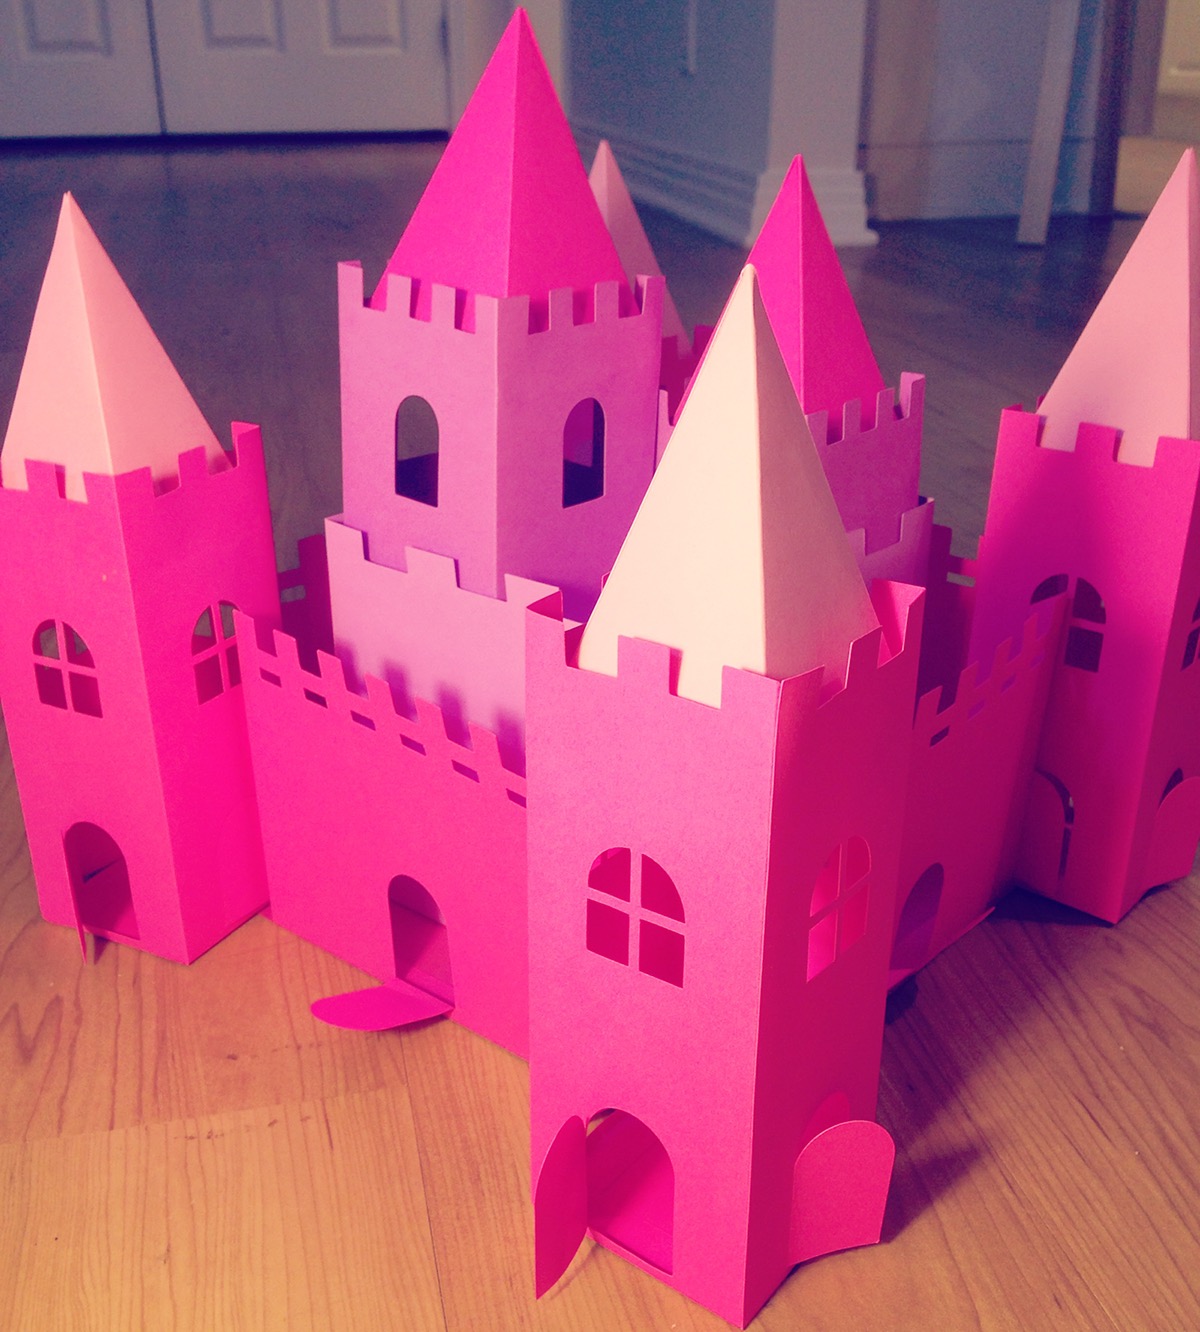 paper paperart papercraft dolphin Castle paperdolphin boat kids zoekids stopmotion paperartist paperlosangeles paperboat paperclouds paperriver